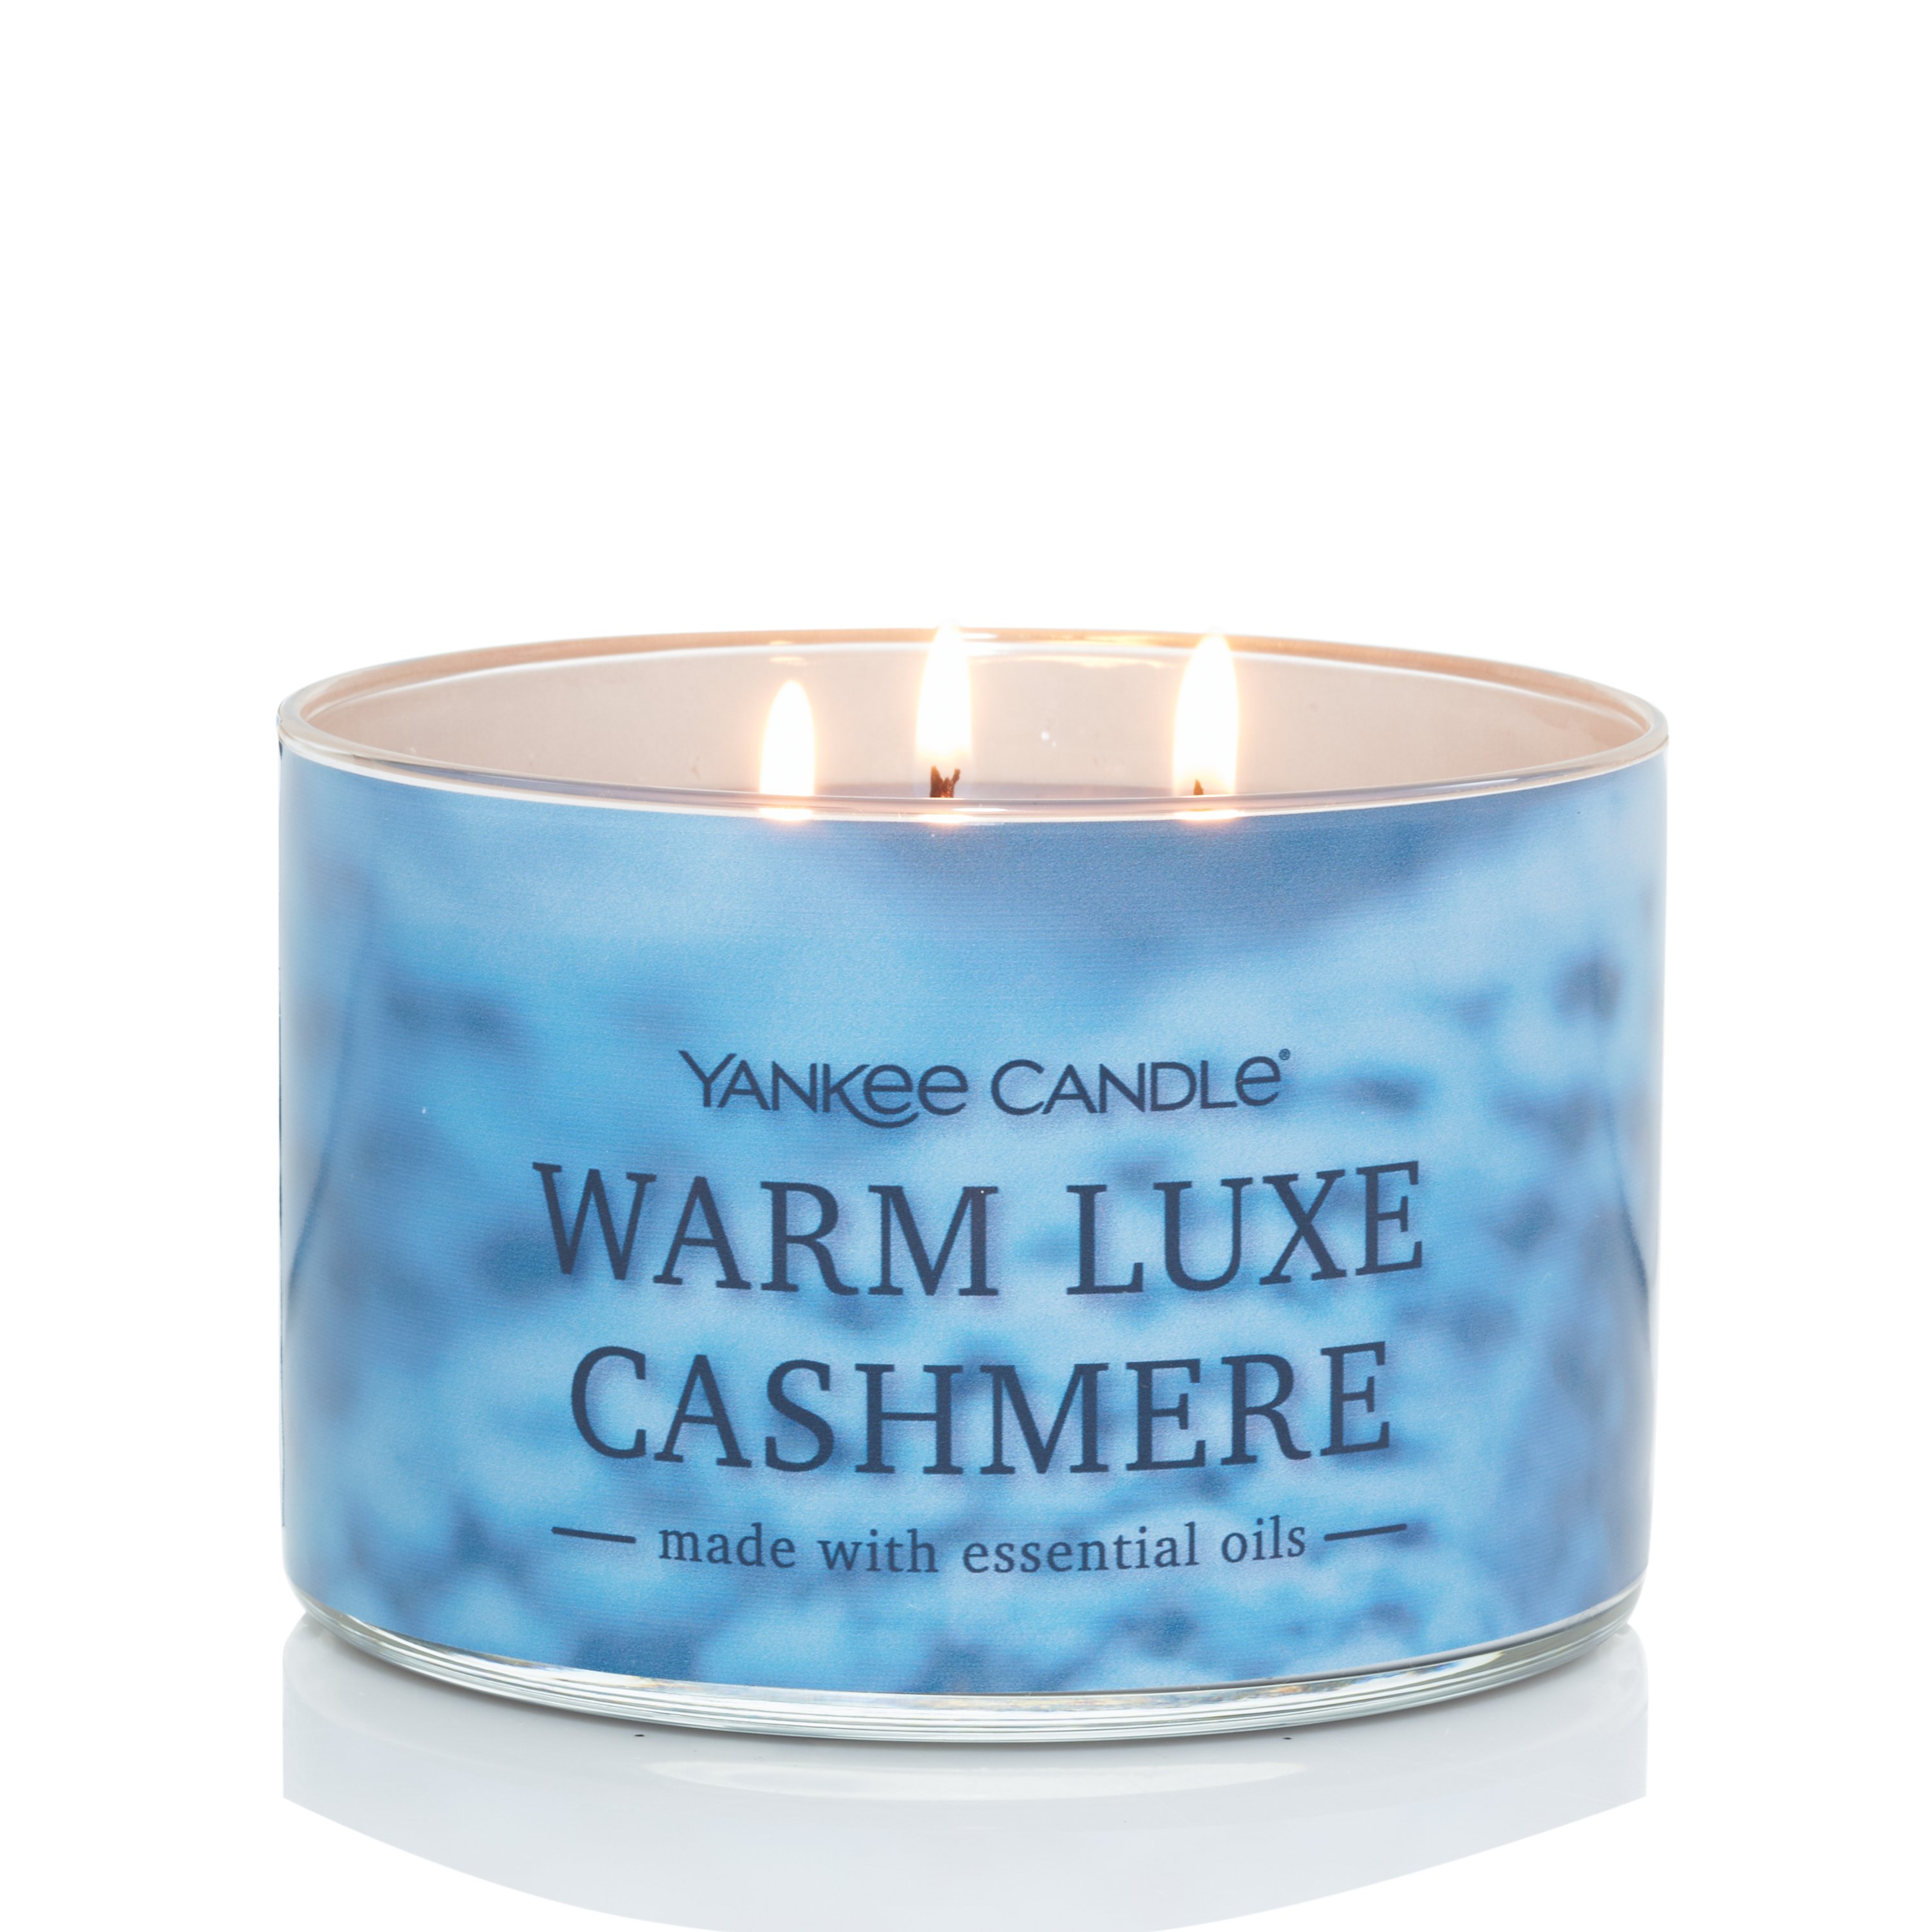 Warm Luxe Cashmere 3-Wick Candle - 3-Wick Candles